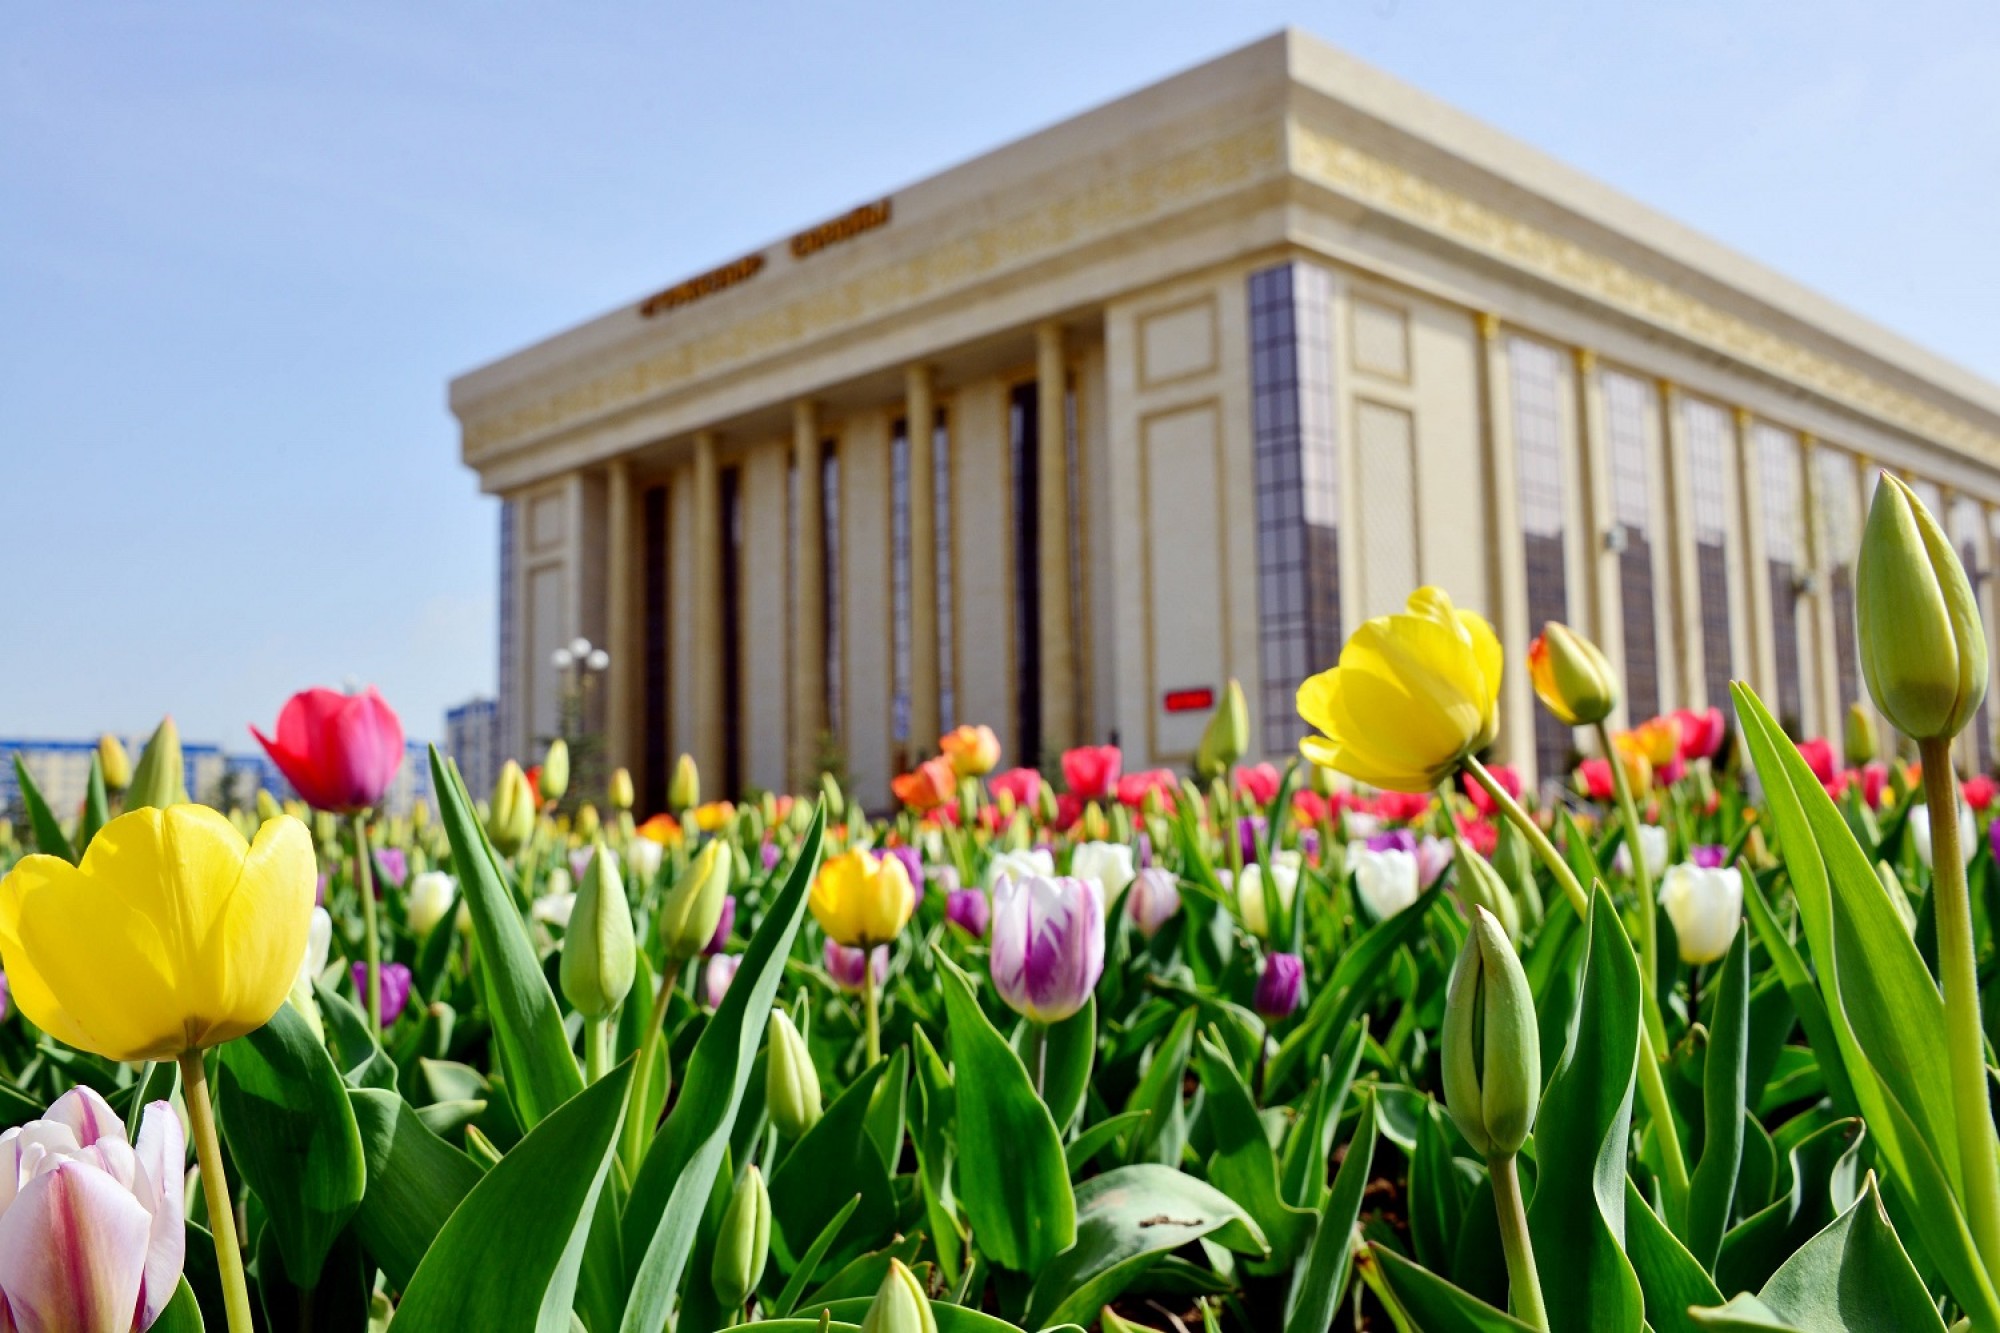 More than million tulips planted in Shymkent